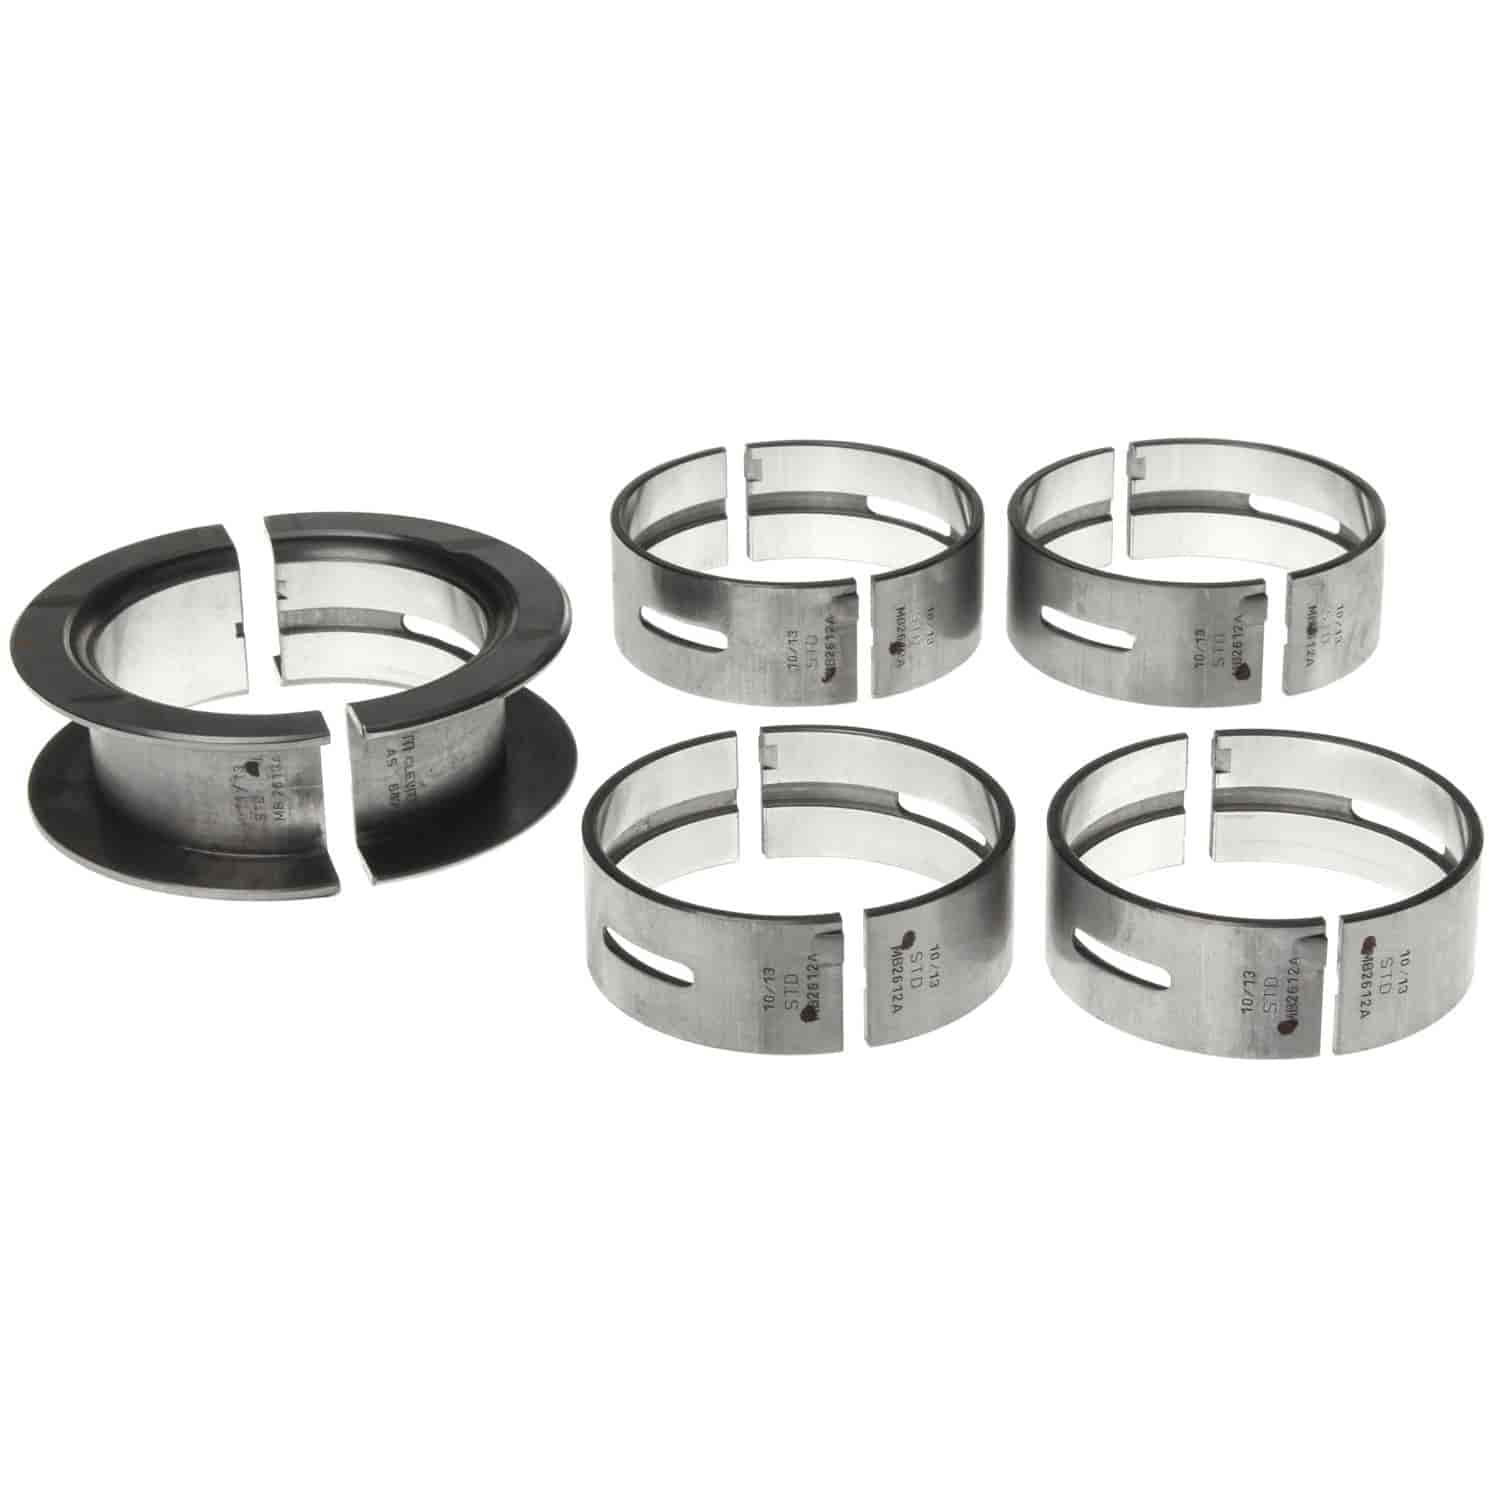 Main Bearing Set Ford 1974-1997 L4 2.0/2.3L with .25mm Undersize